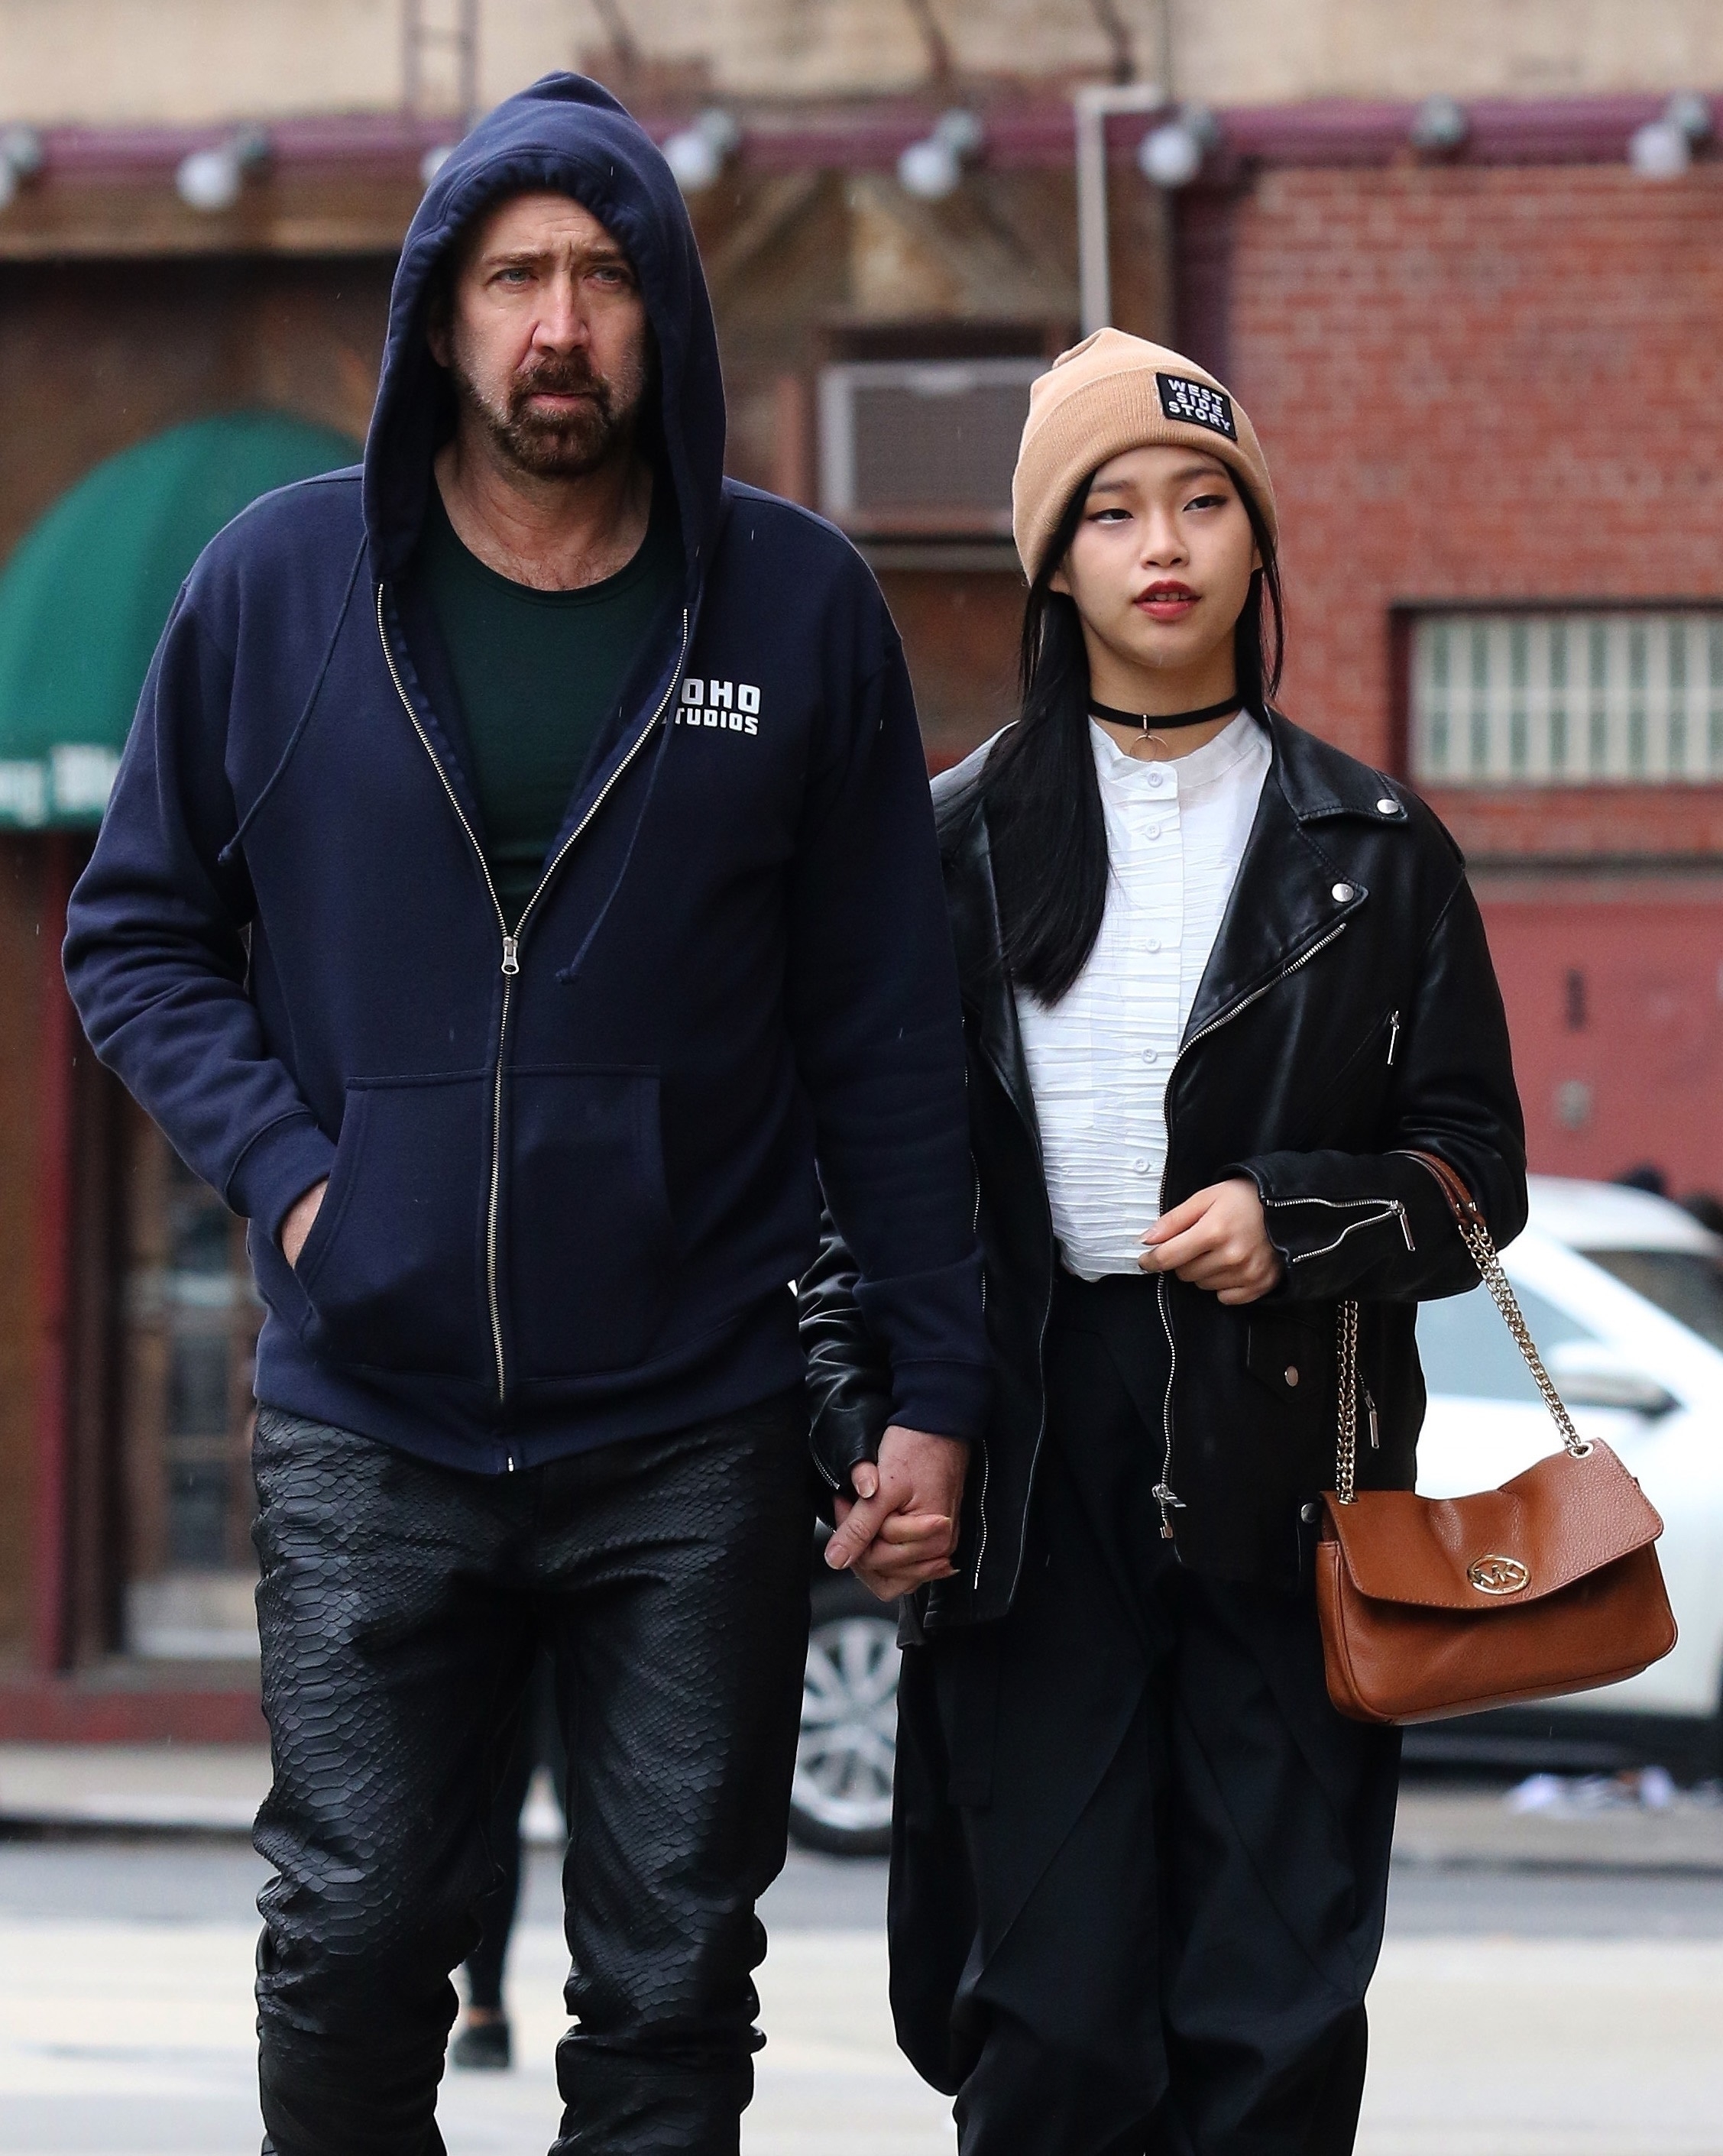 <p>Nicolas Cage was 56 when he made his <a href="https://www.wonderwall.com/celebrity/couples/drake-dating-model-imaan-hammam-girlfriend-celeb-love-life-news-mid-february-2020-hollywood-romance-report-3022242.gallery?photoId=1074673">public debut</a> with Riko Shibata at the <a href="https://www.wonderwall.com/awards-events/red-carpet/2020-independent-spirit-awards-see-all-photos-red-carpet-3022212.gallery">Independent Spirit Awards</a> in Santa Monica, California, in February 2020. A few weeks later, Britain's The Sun and DailyMail.com reported that Riko -- seen here with Nic in New York City in March 2020 -- is 30 years the actor's junior and three years younger than his eldest son, Weston. Nic was 57 when he married a 26-year-old Riko -- it's his fifth marriage -- at the Wynn Hotel in Las Vegas on Feb. 16, 2021. In 2022, they announced they're expecting their first child together. </p>